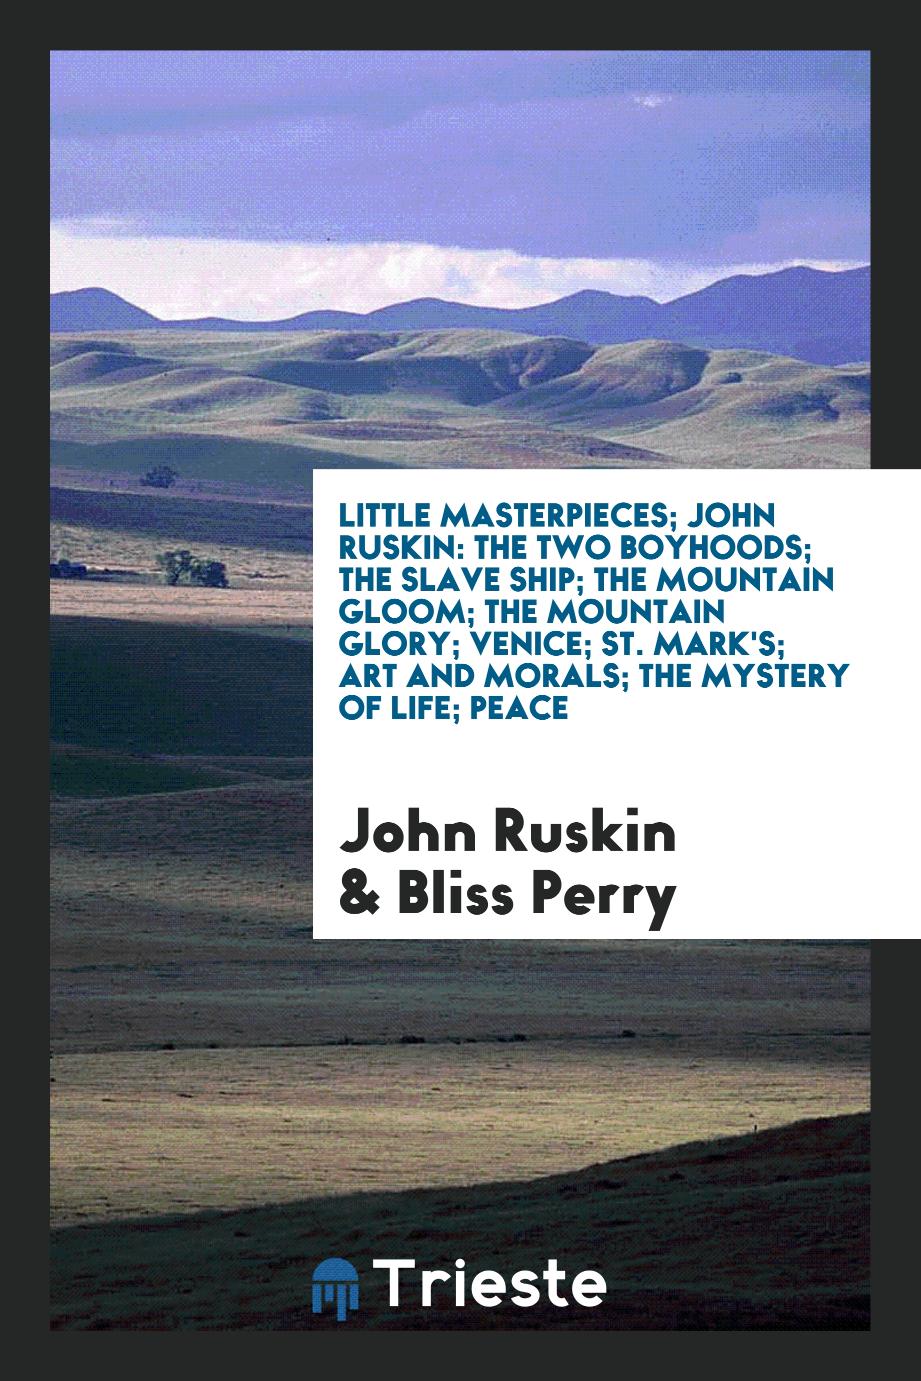 Little Masterpieces; John Ruskin: The Two Boyhoods; The Slave Ship; The Mountain Gloom; The Mountain Glory; Venice; St. Mark's; Art and Morals; The Mystery of Life; Peace